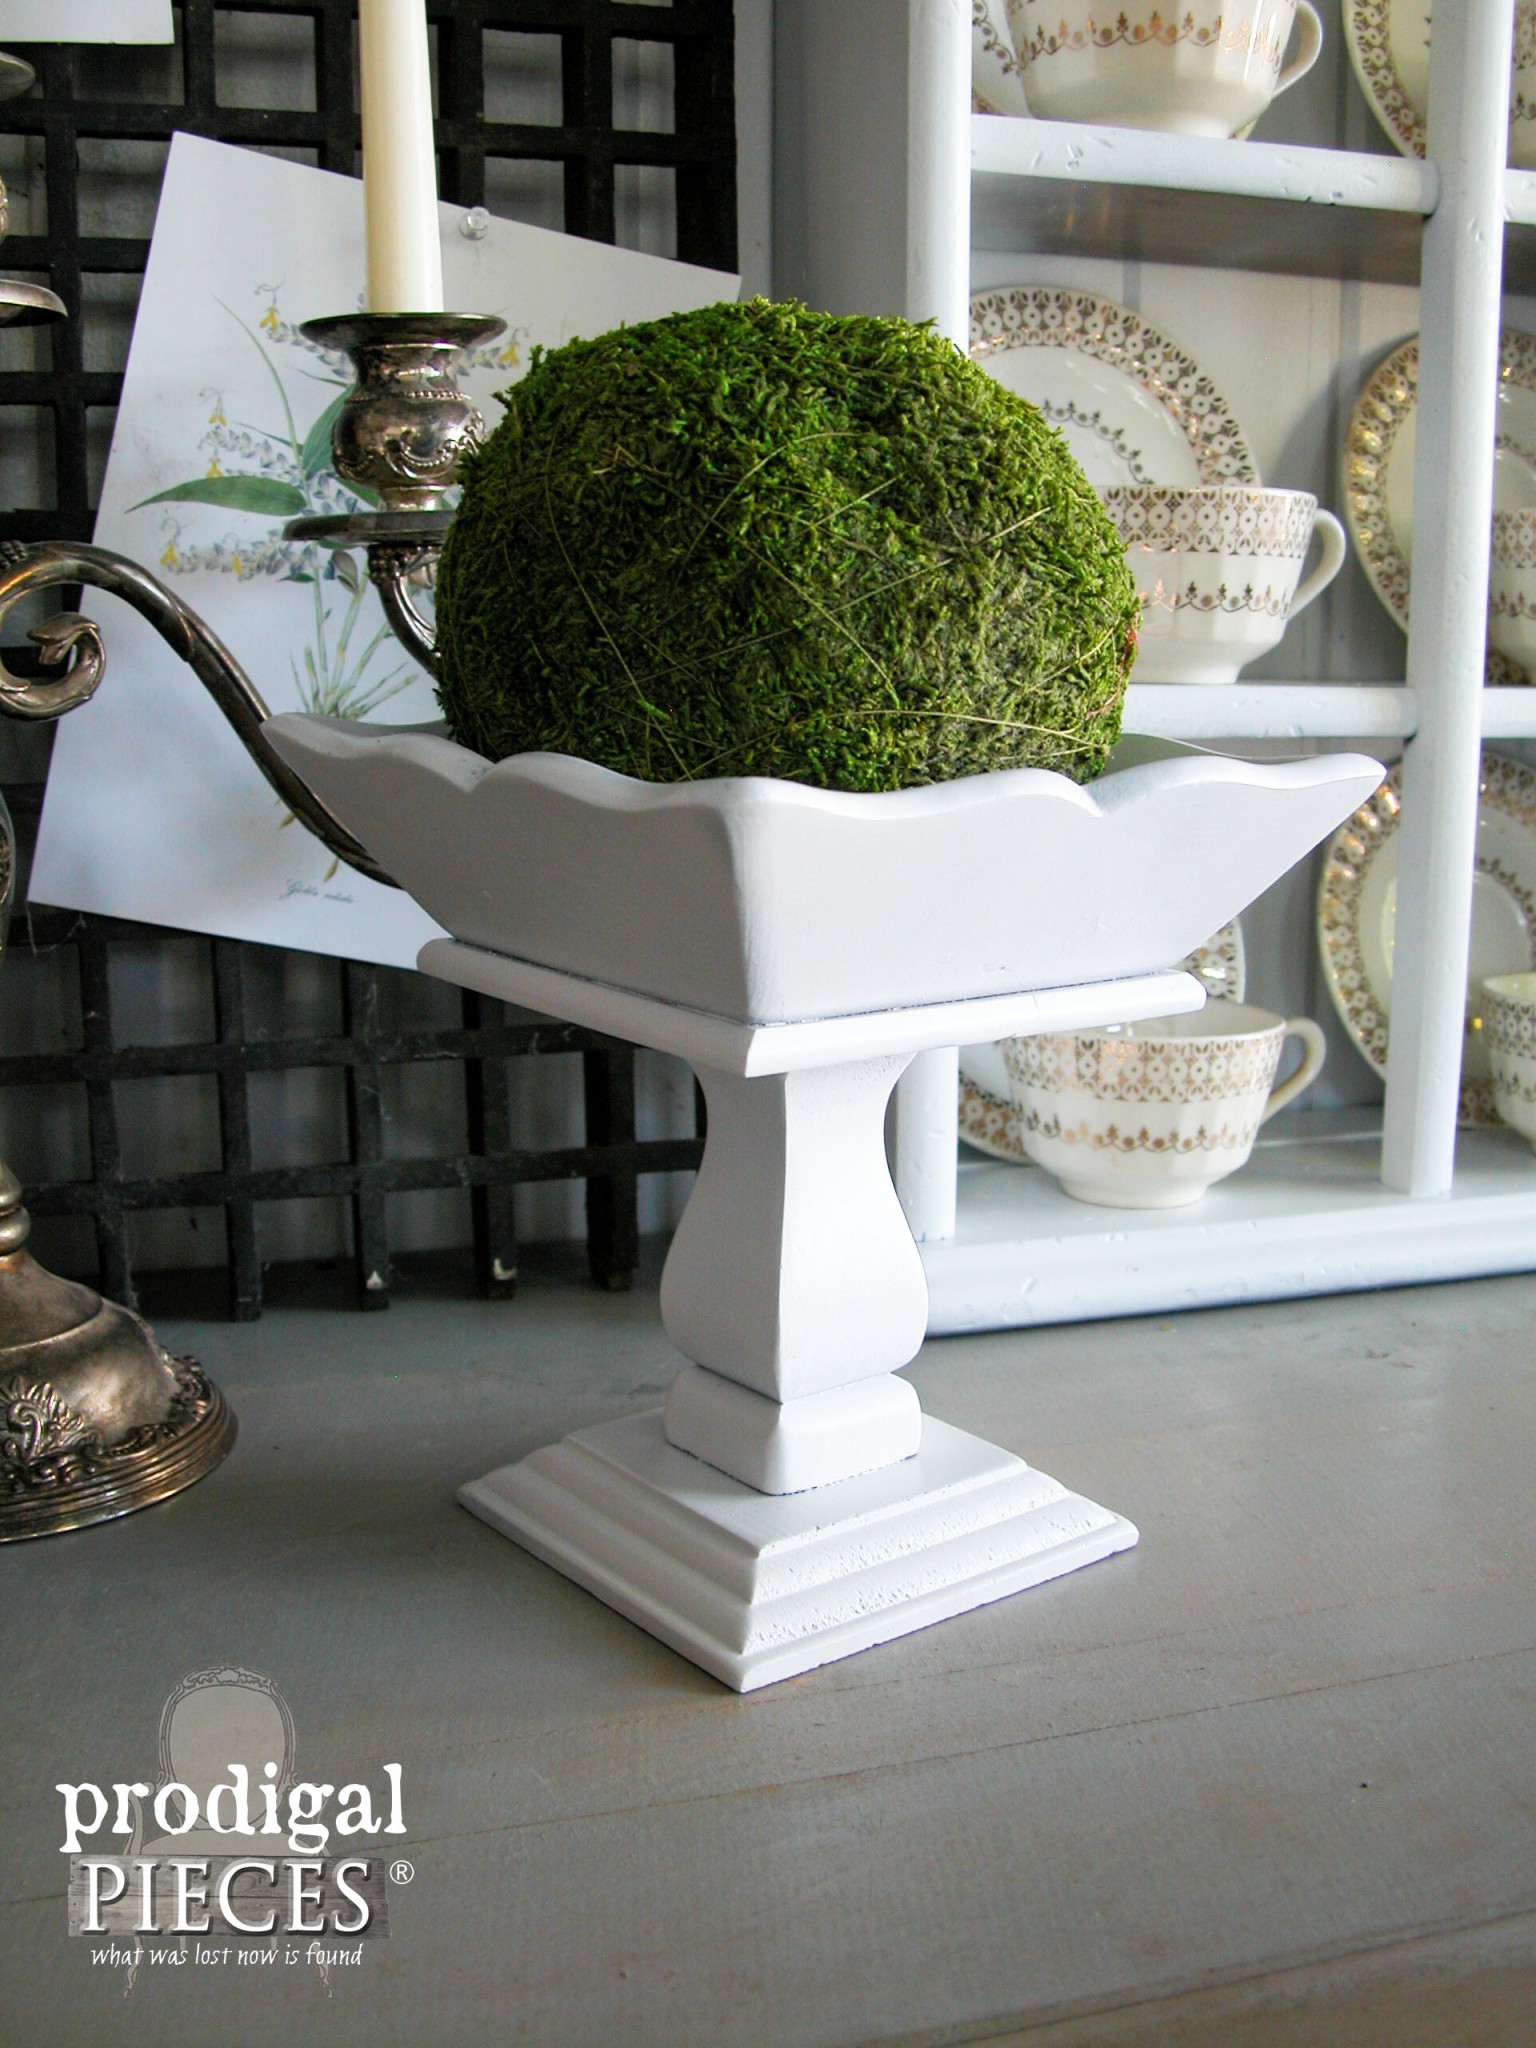 Handmade Wooden Pedestal Made New with Paint by Prodigal Pieces | www.prodigalpieces.com